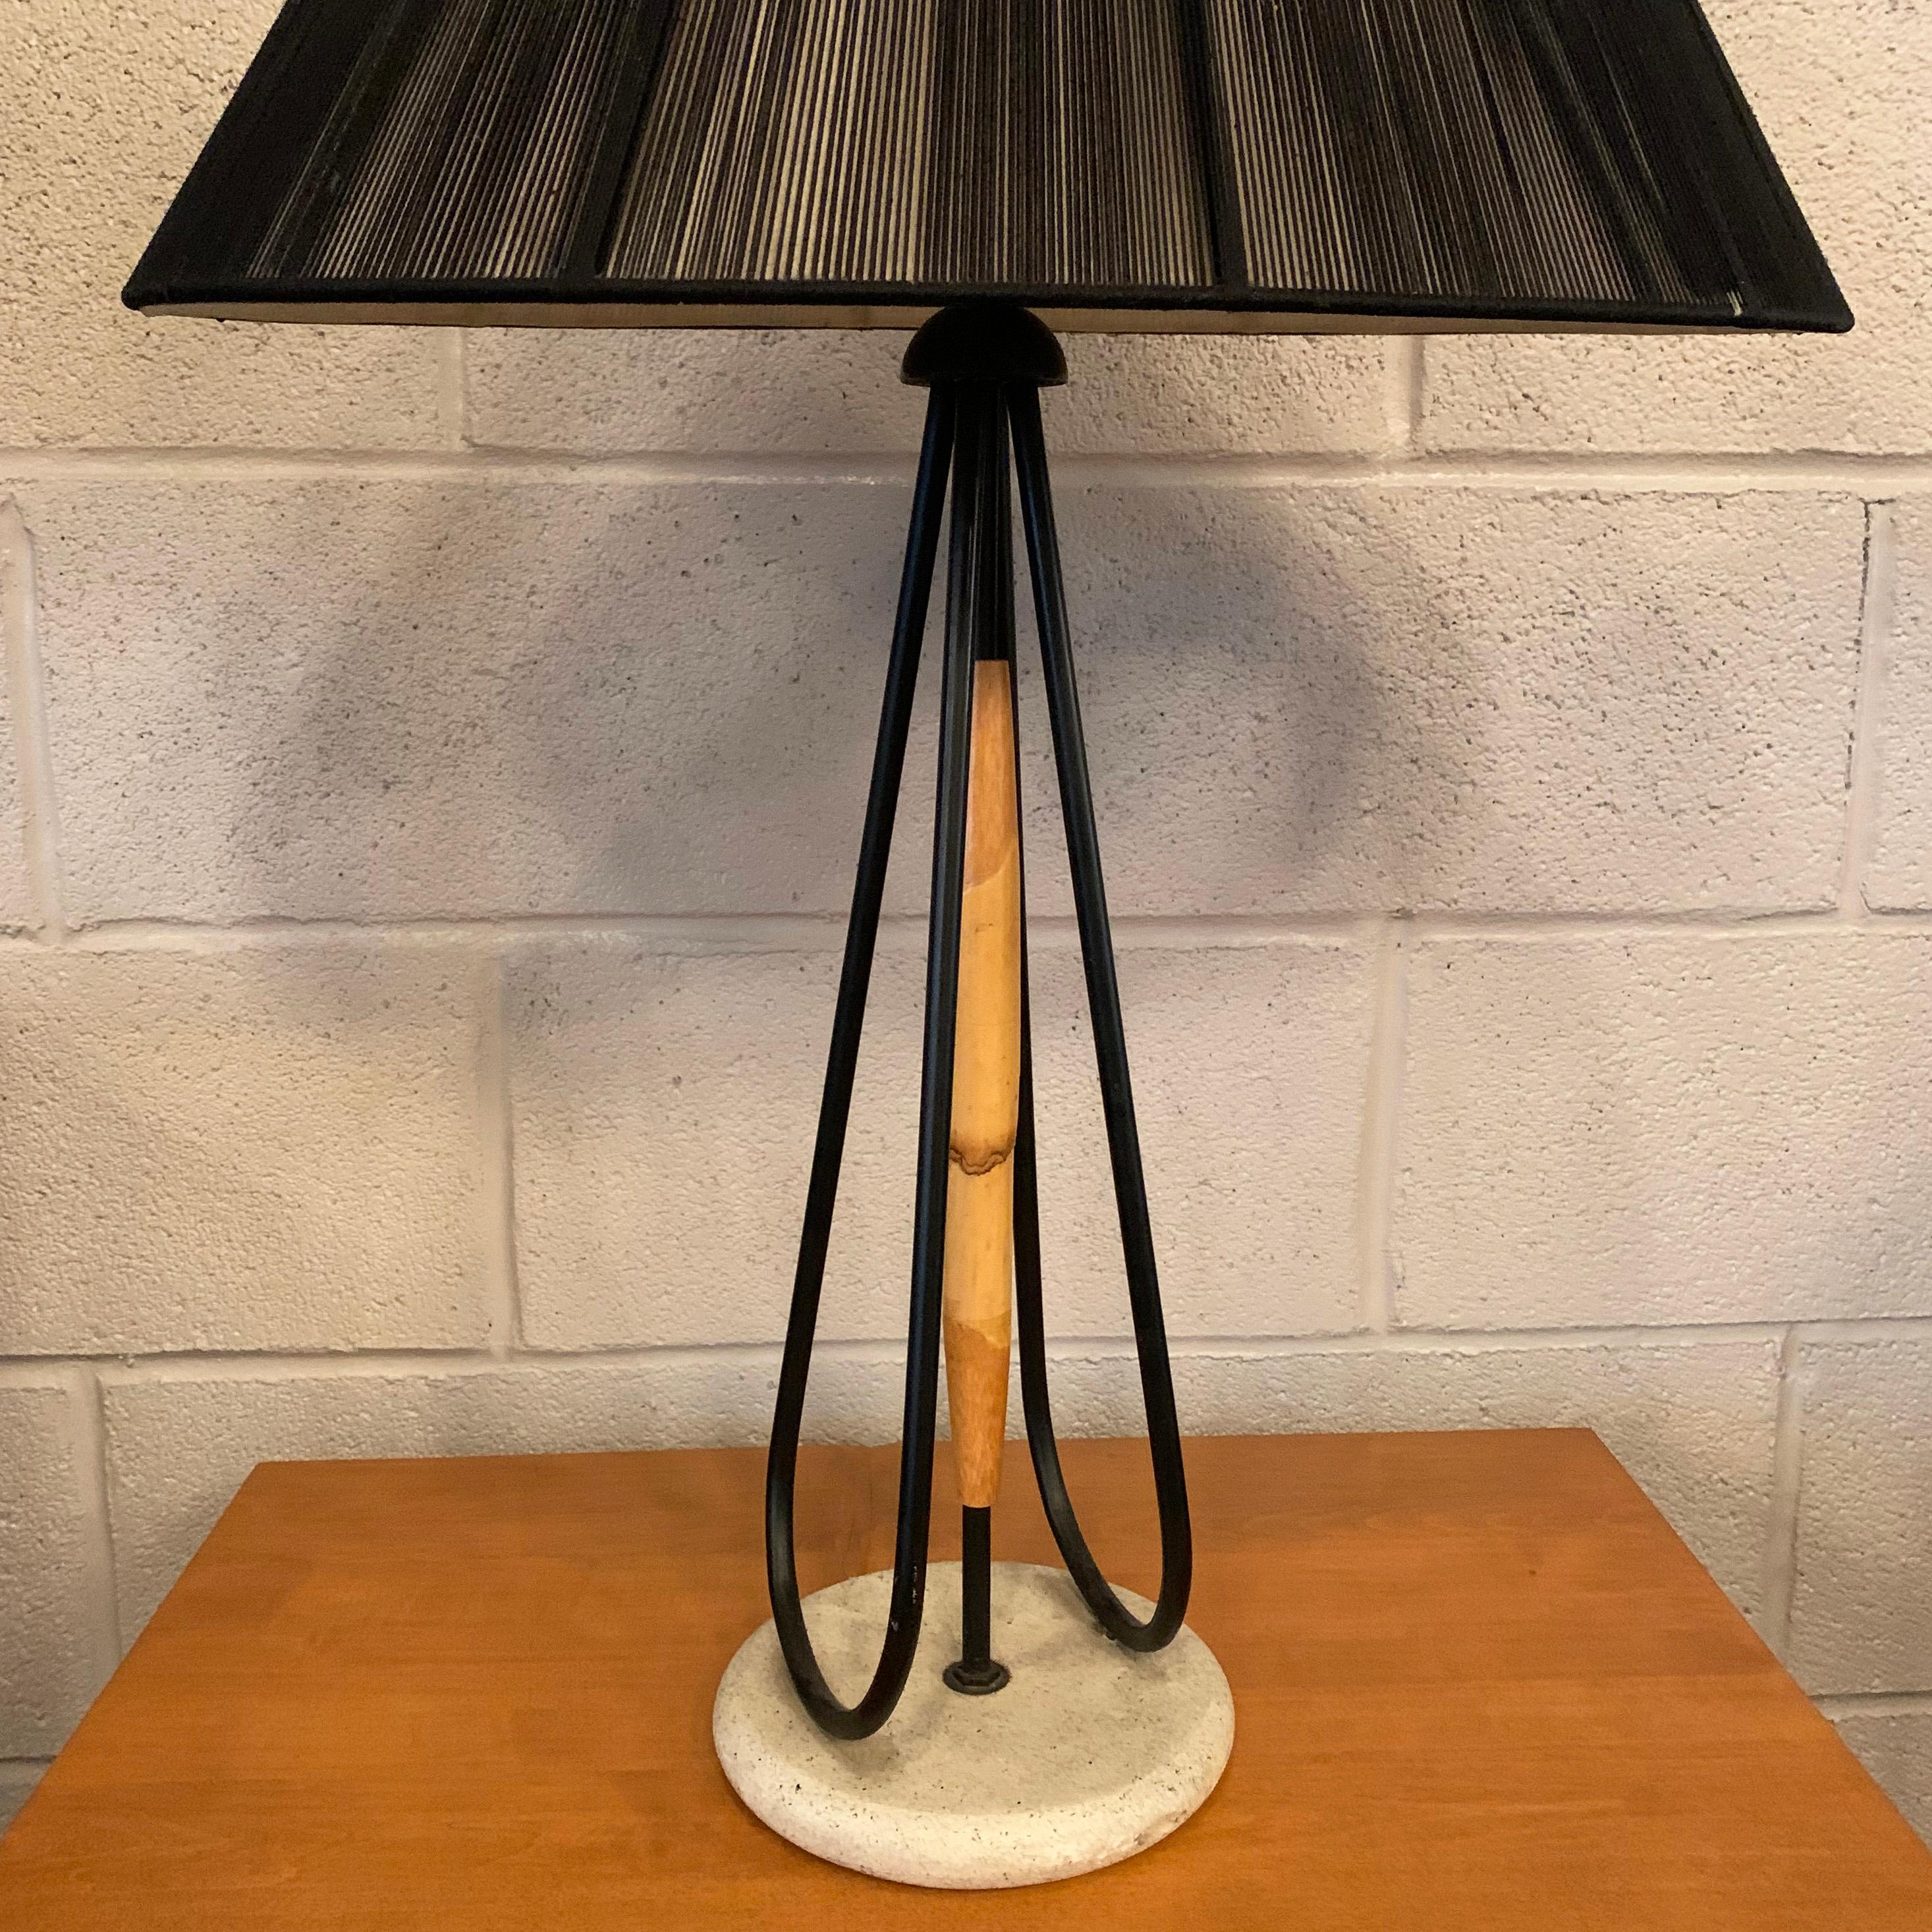 20th Century Mid-Century Modern Bamboo Table Lamp with String Shade